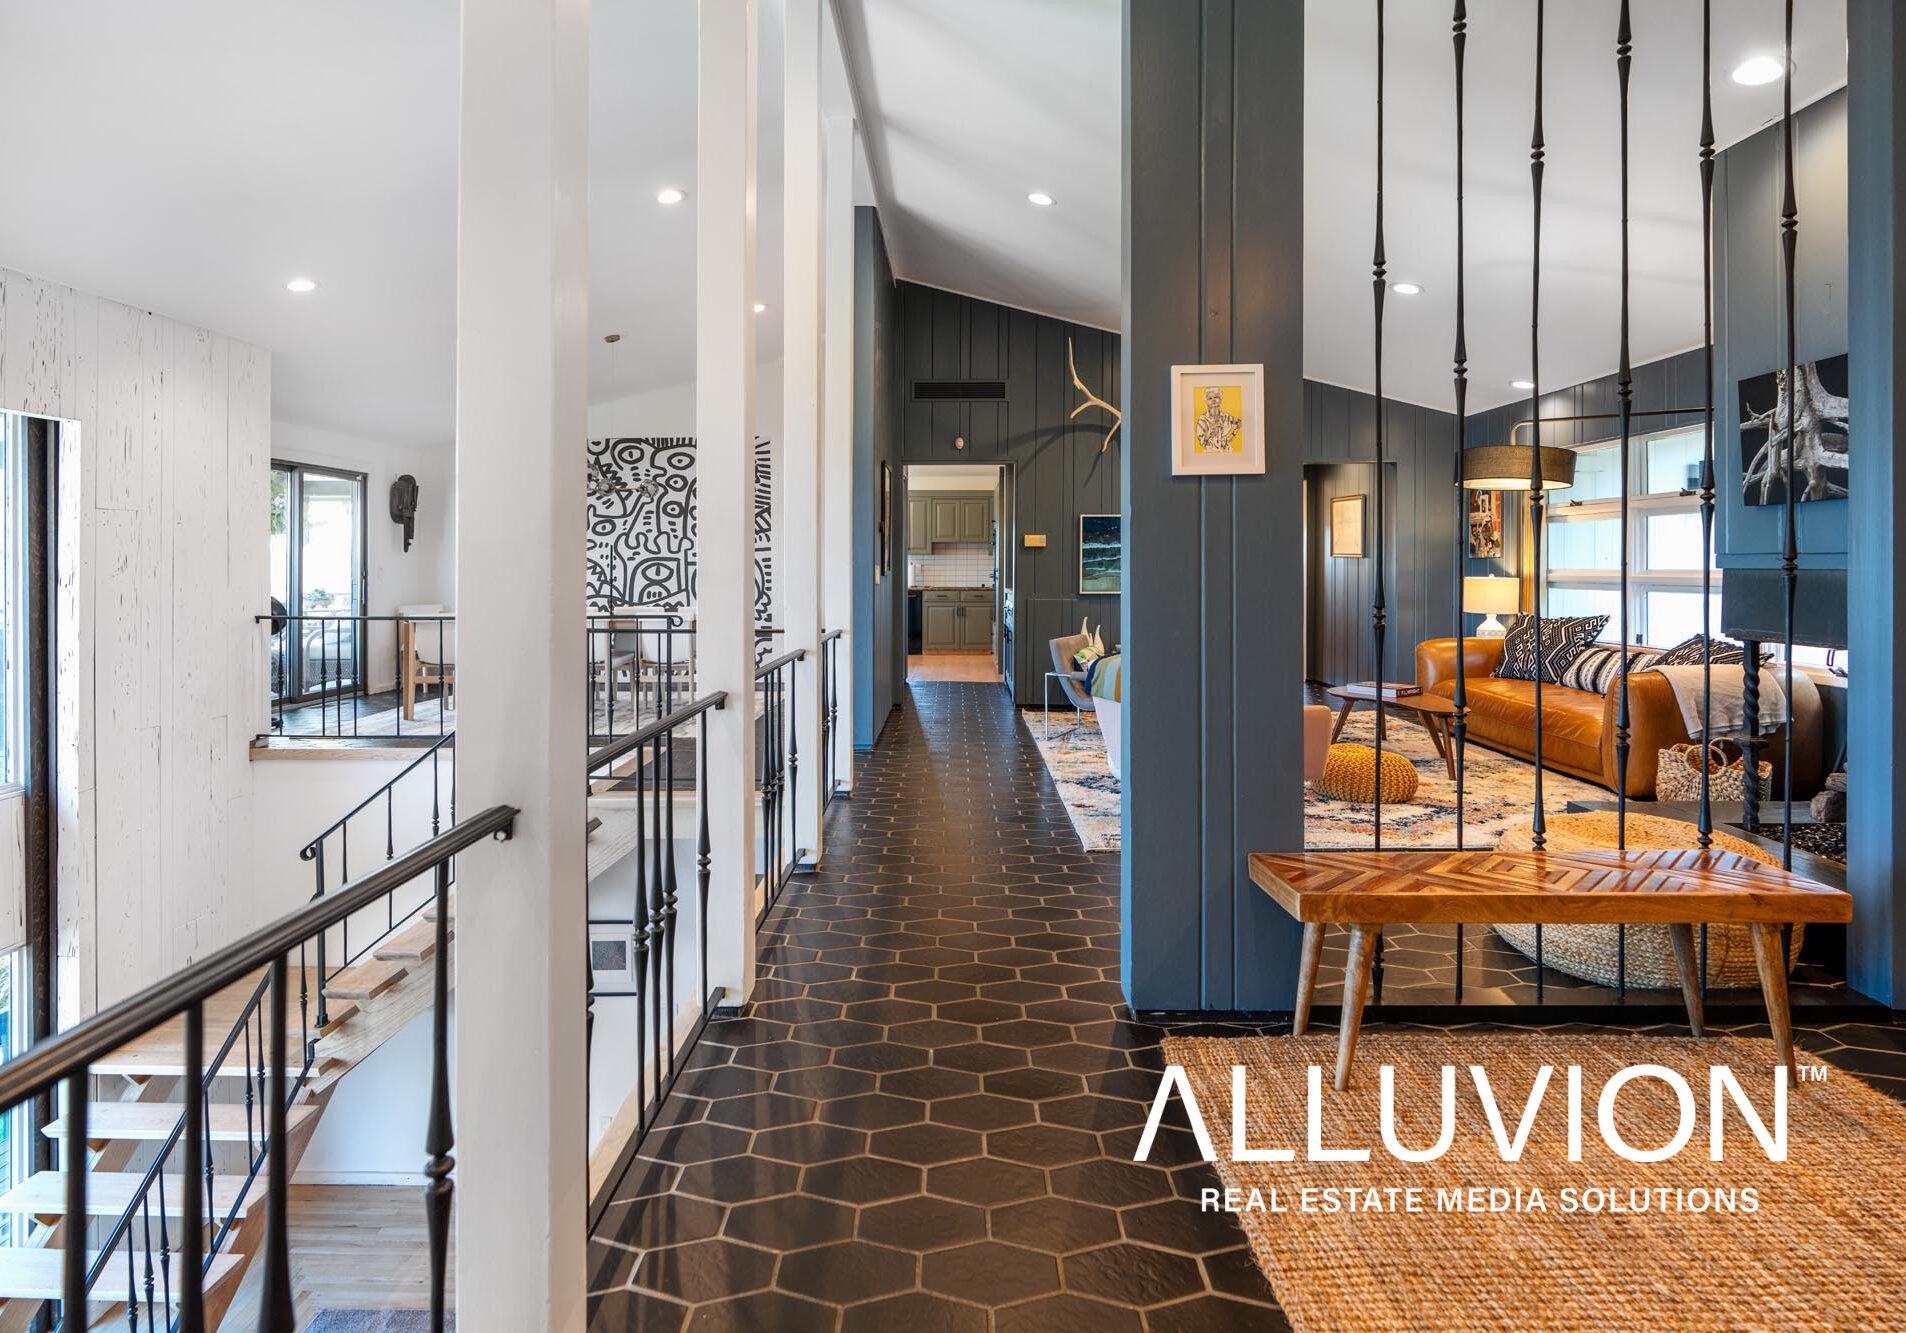 Alluvion Media: Where Photographic Artistry Meets Brand Narrative – Luxury Hospitality Photography in New York City, the Hudson Valley, Catskills, and the Hamptons